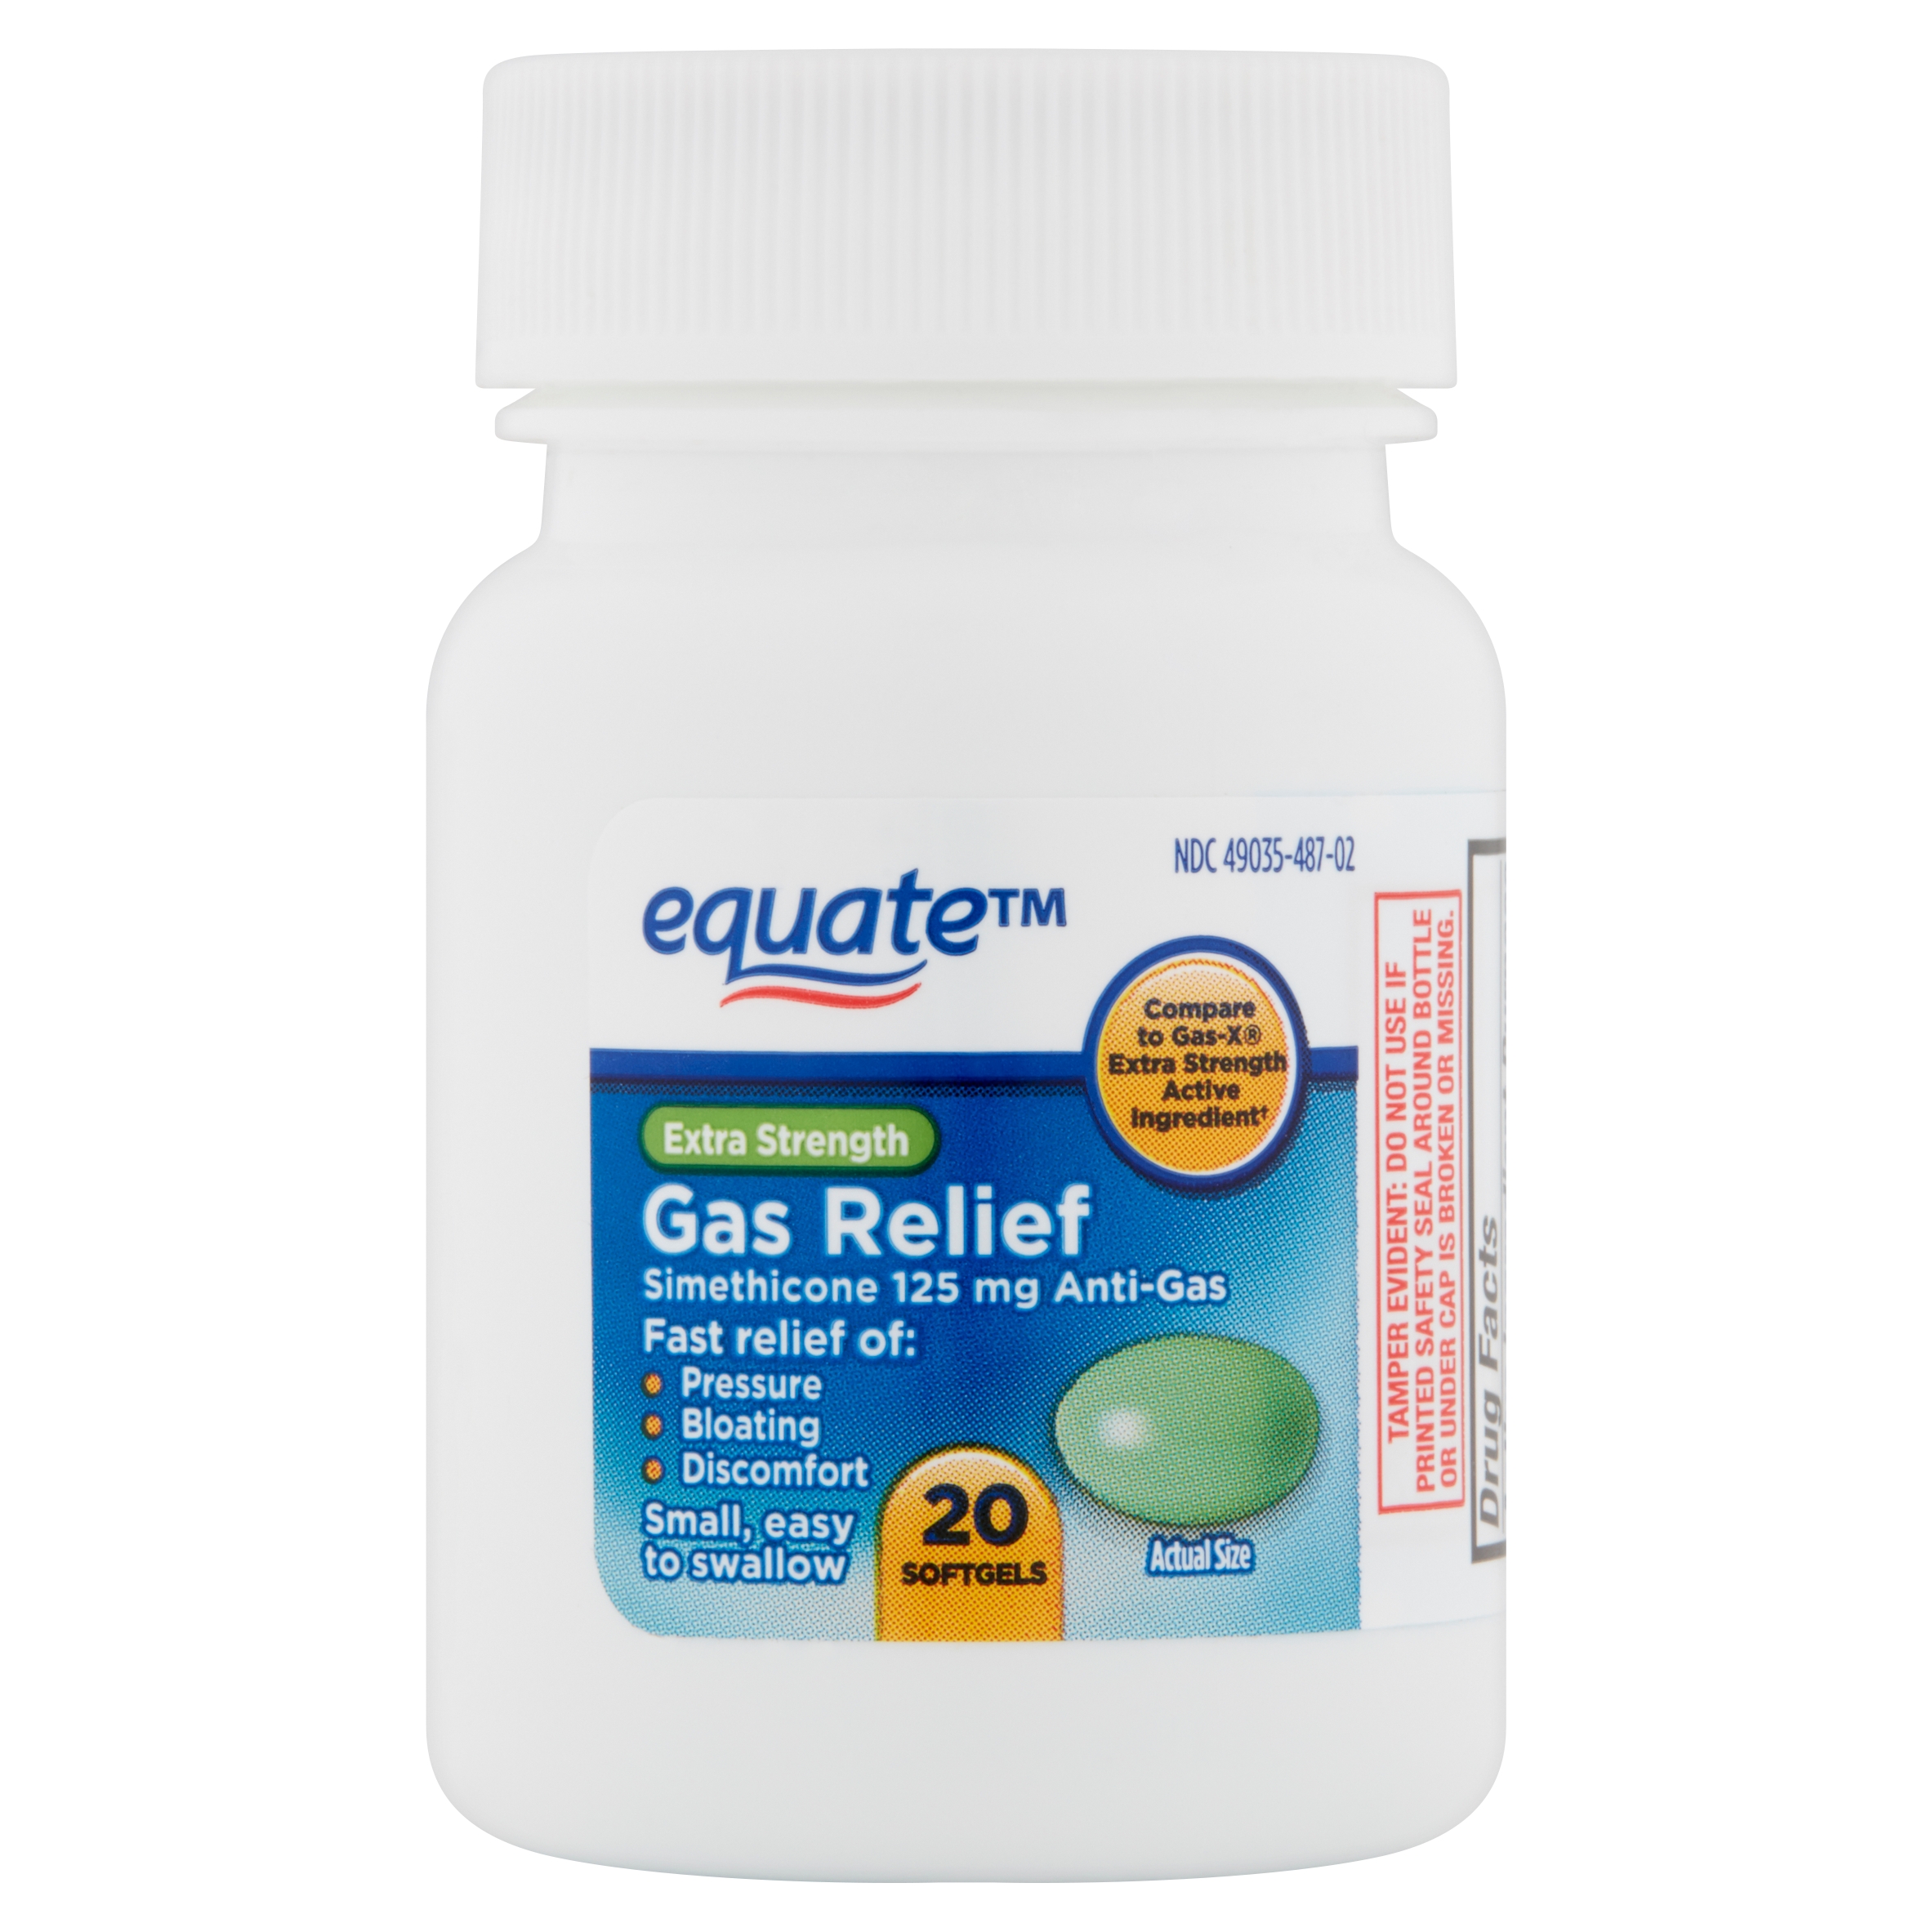 Equate Extra Strength Gas Relief Soft gels, 20 Count - image 3 of 11